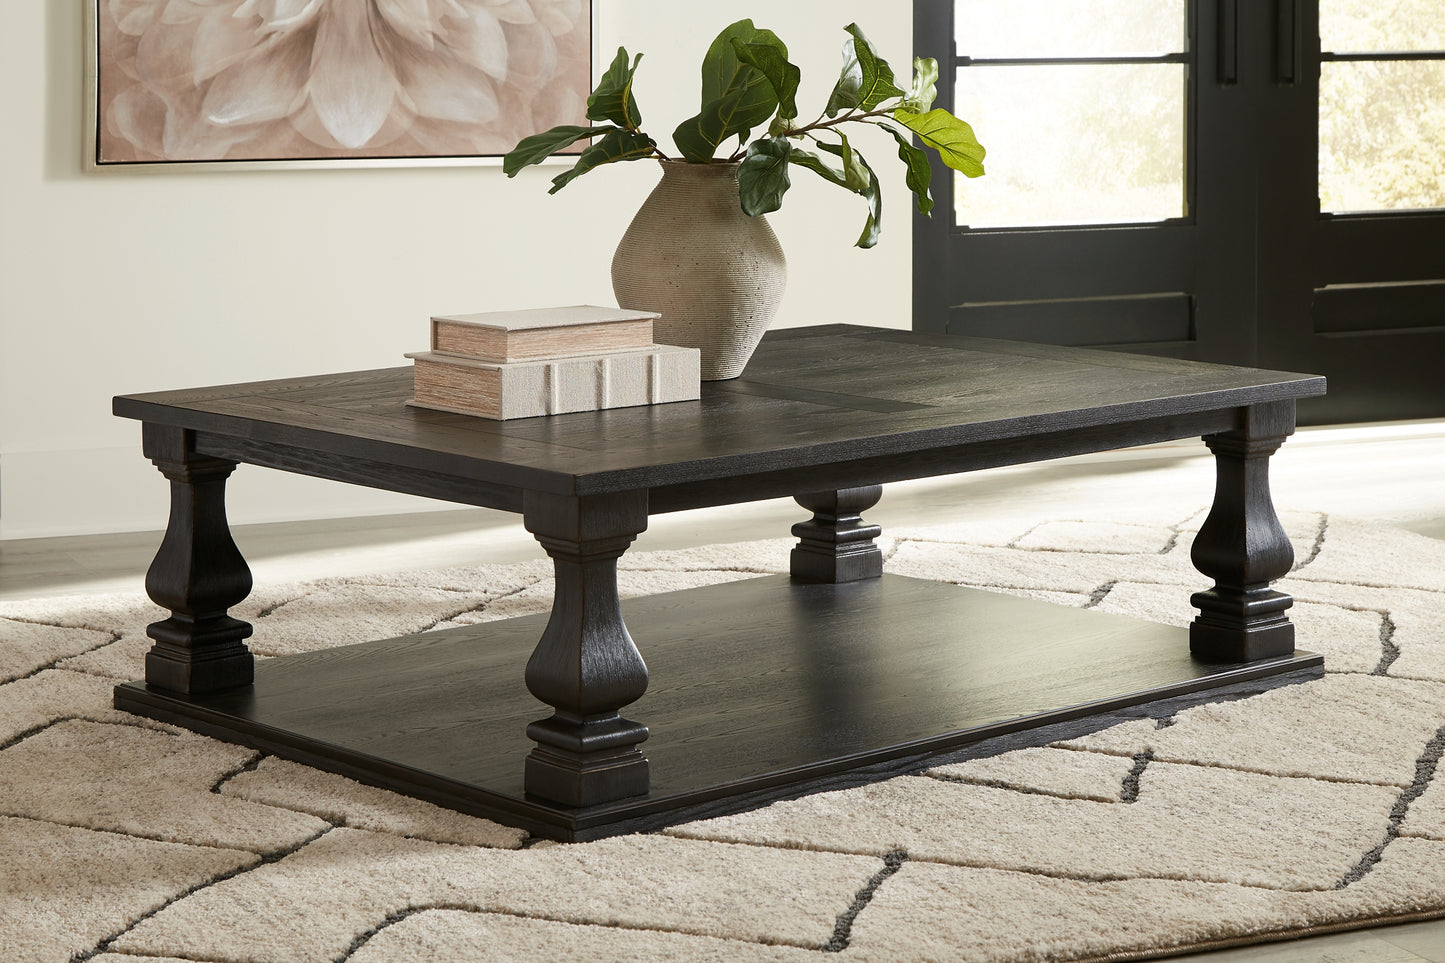 Wellturn Coffee Table with 2 End Tables Signature Design by Ashley®